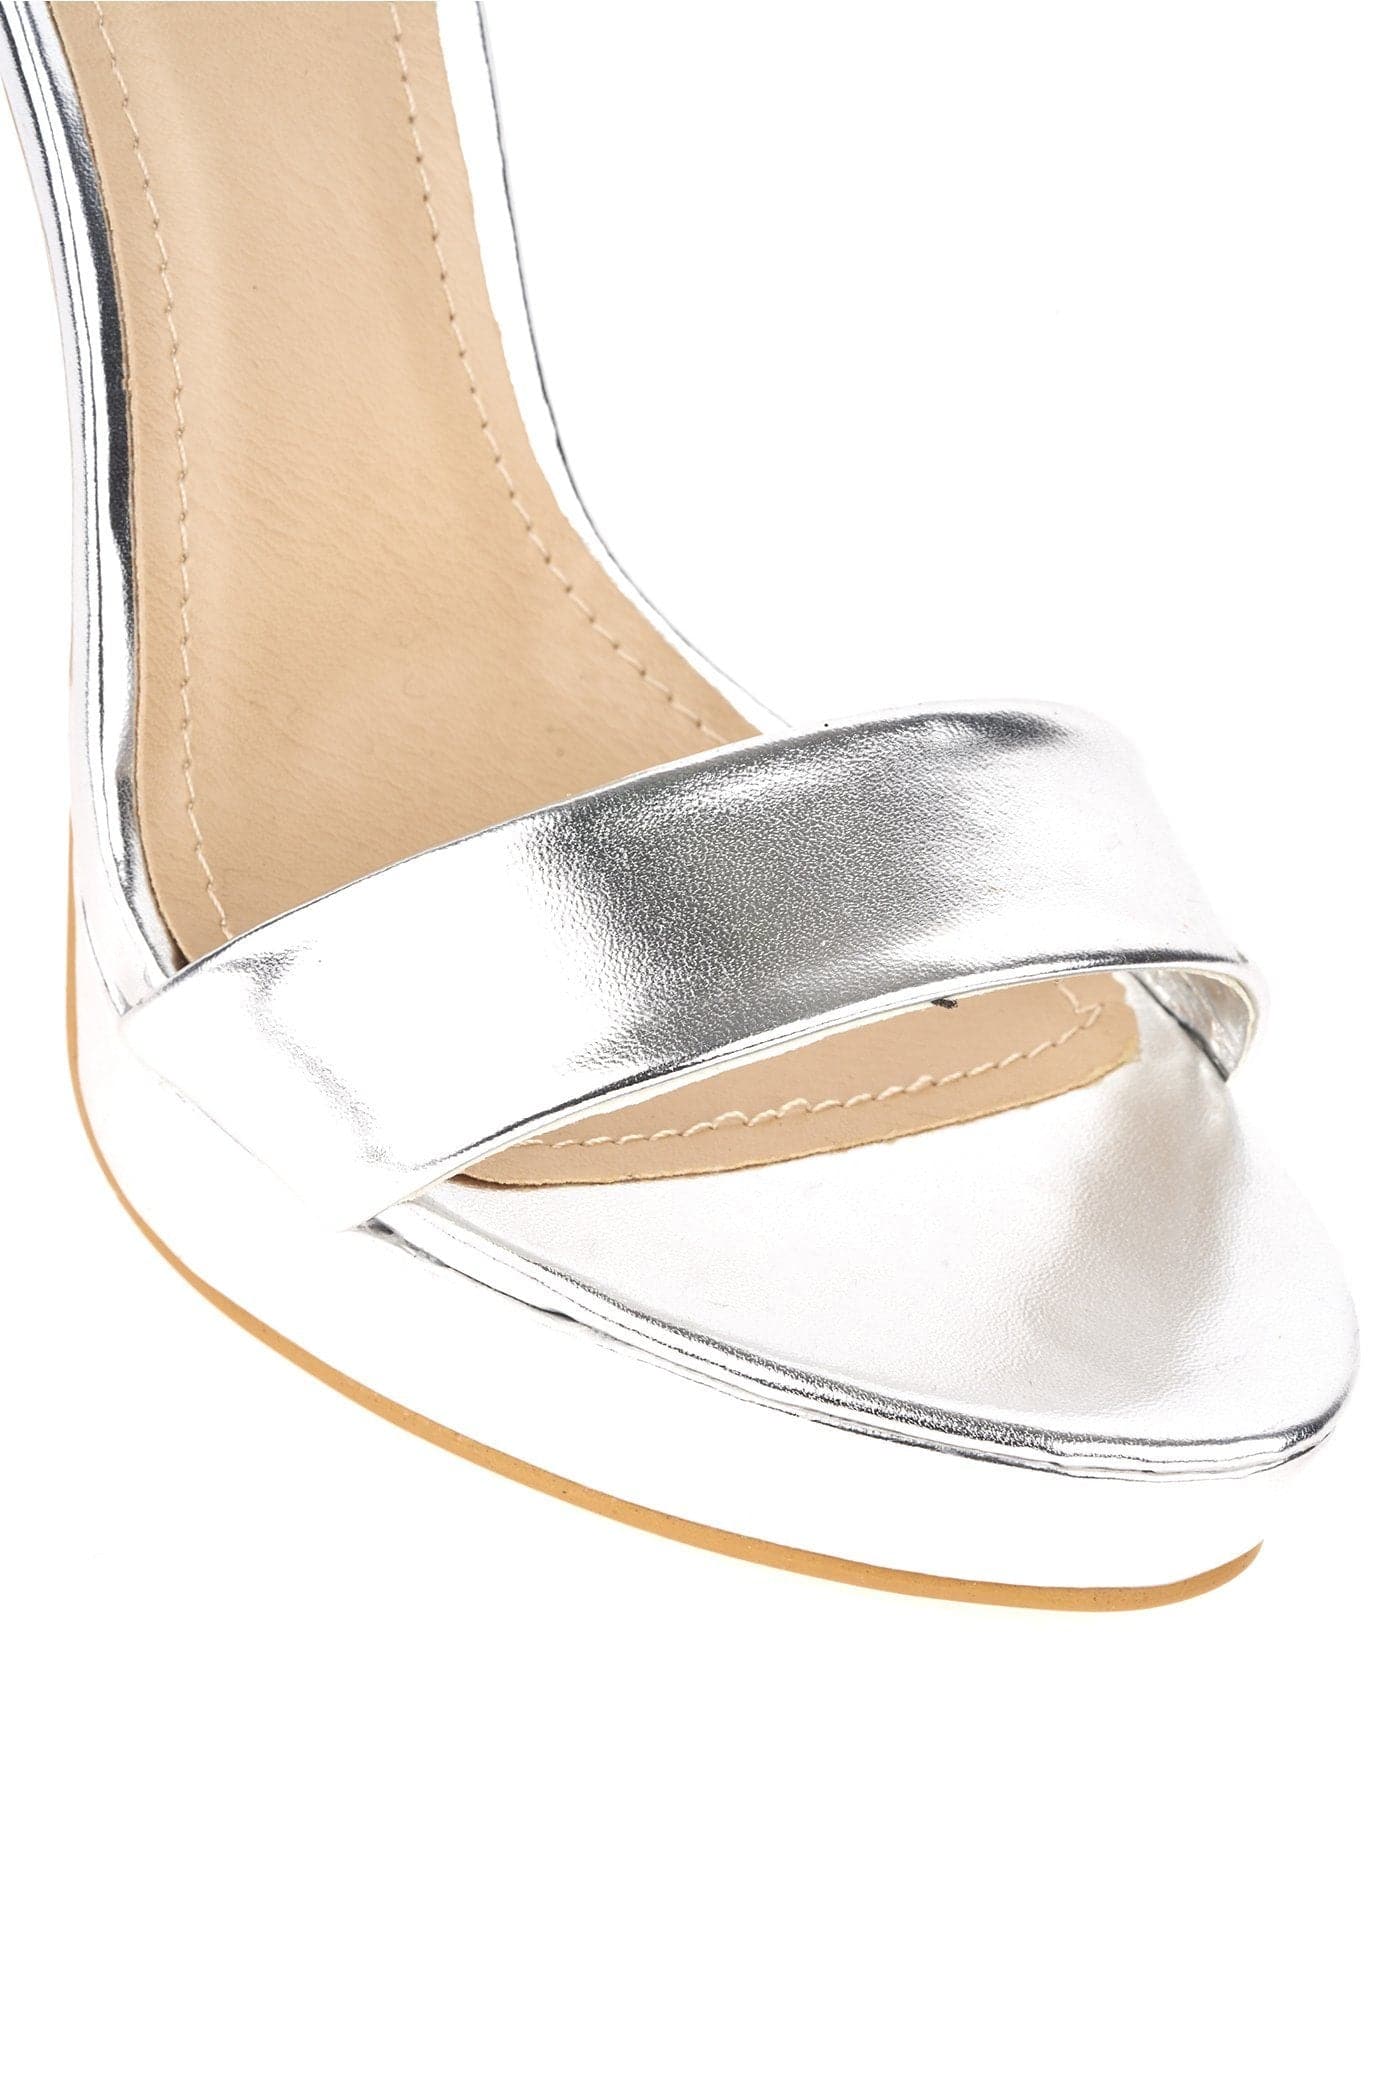 Miss Diva Ella Barely There Platform Sandal in Silver PU